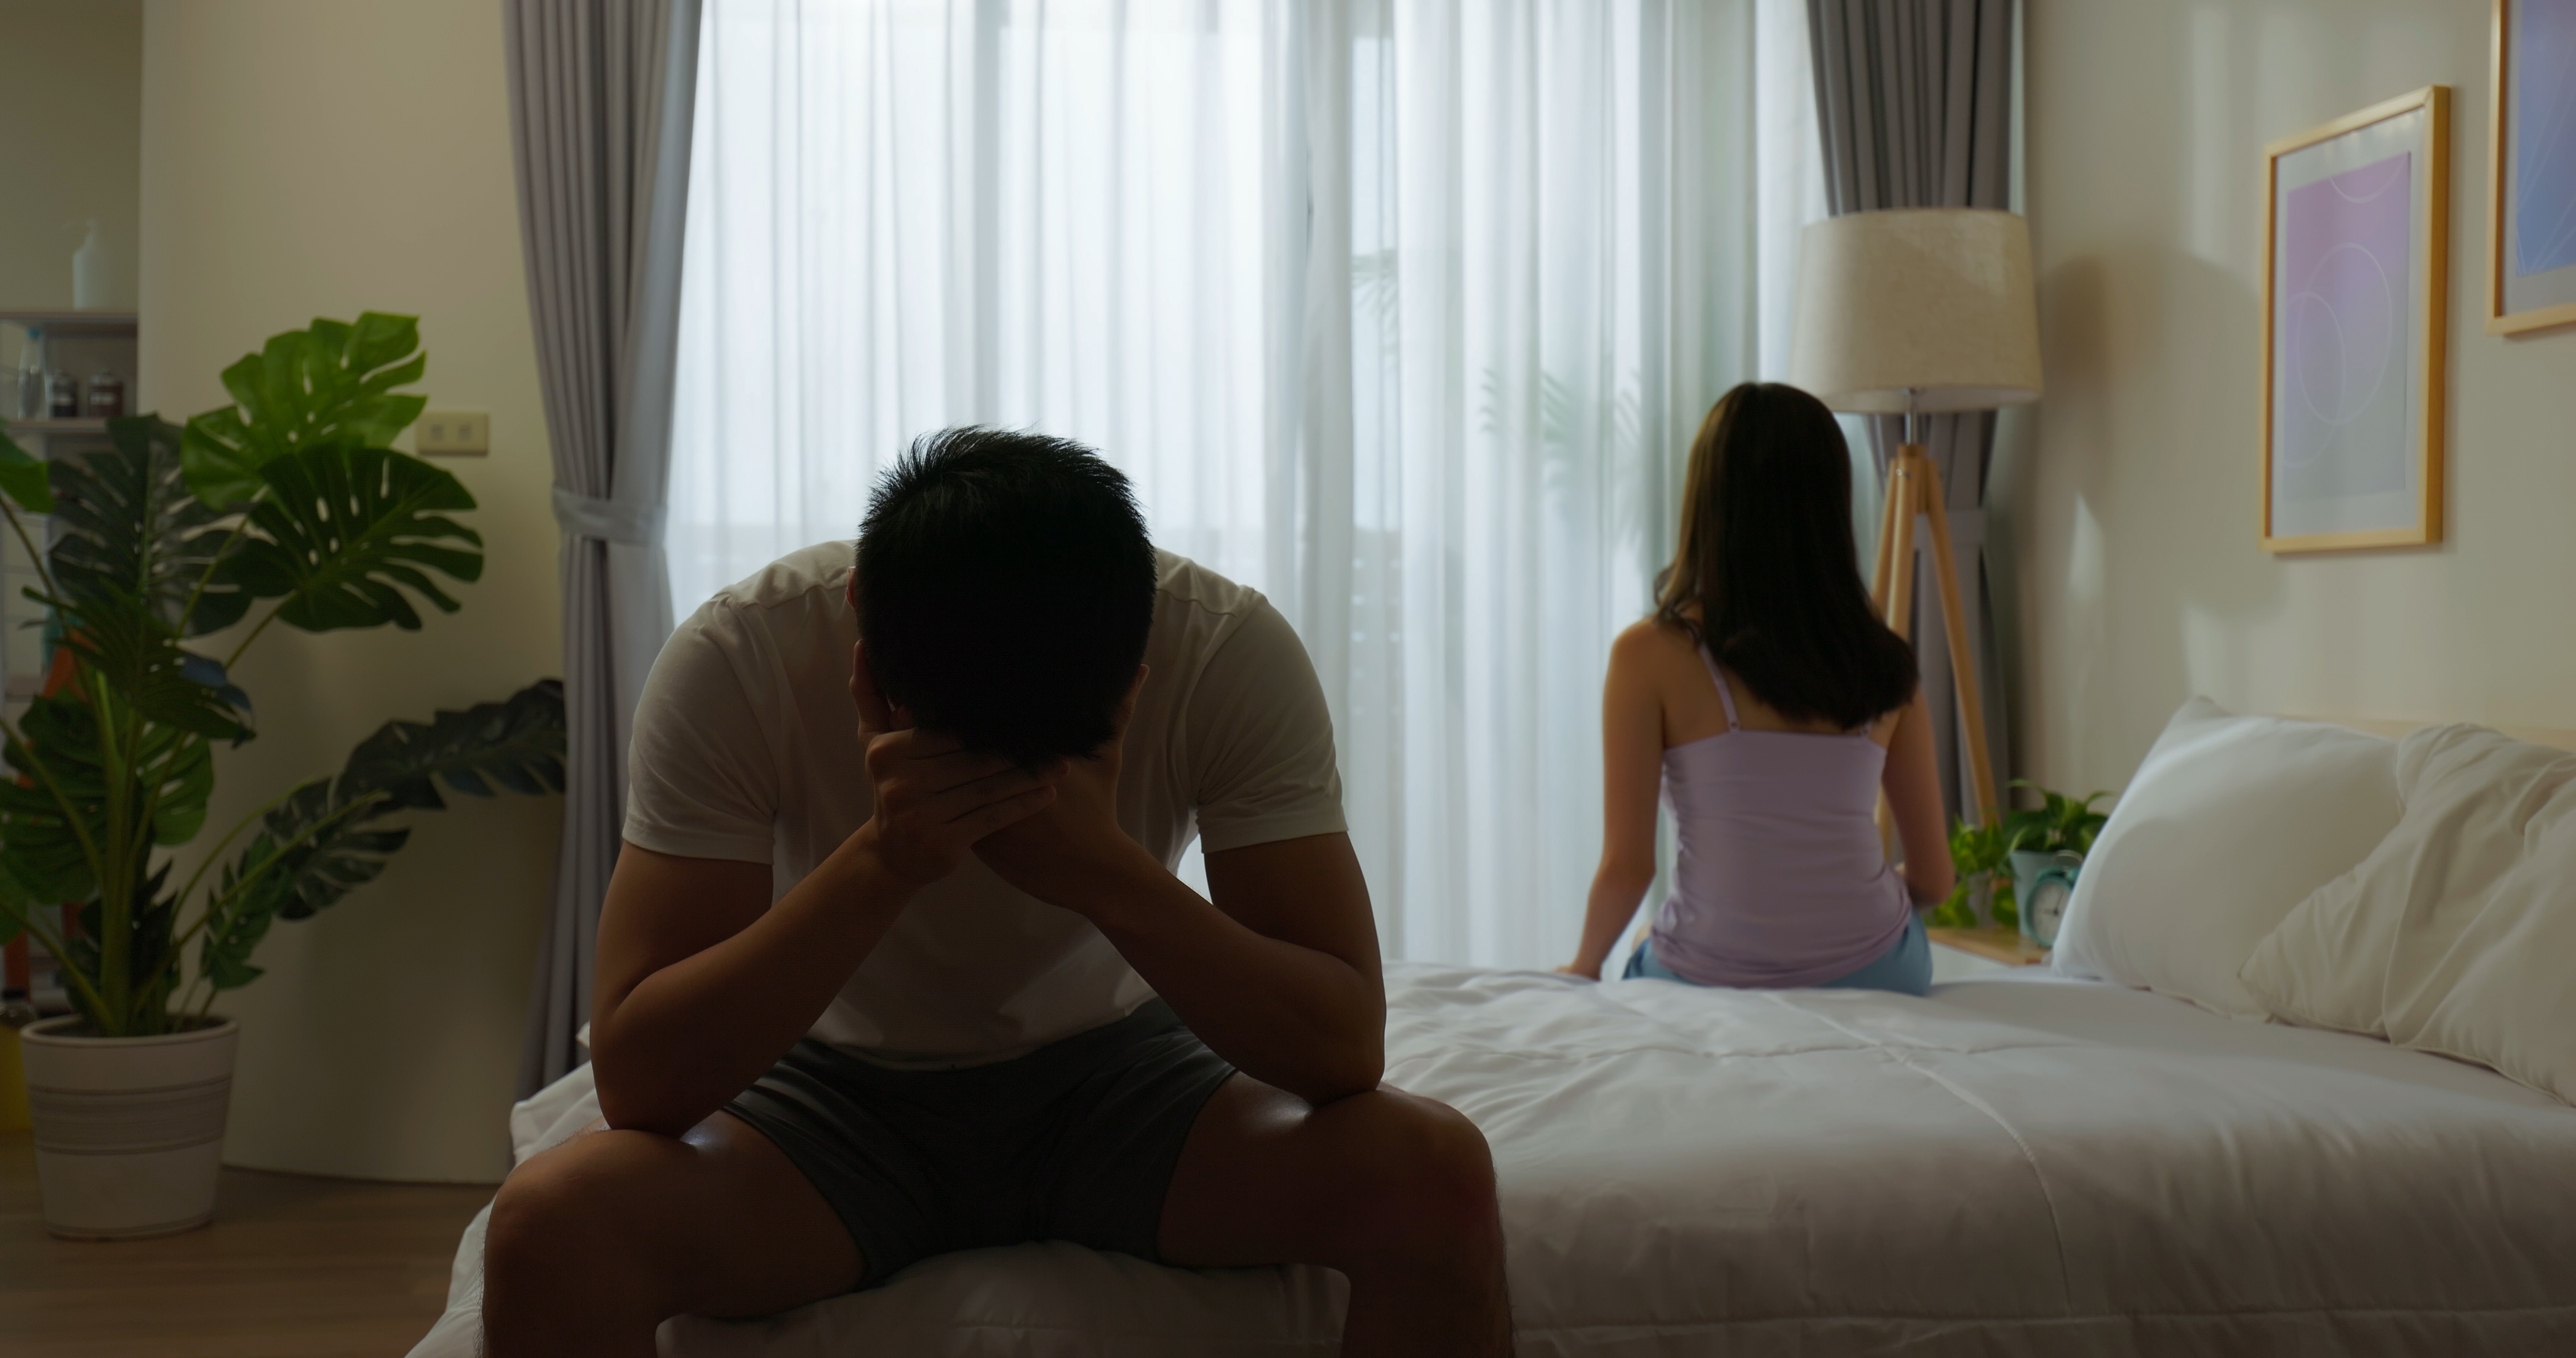 A couple sitting on their bed with their backs to each other | Source: Shutterstock